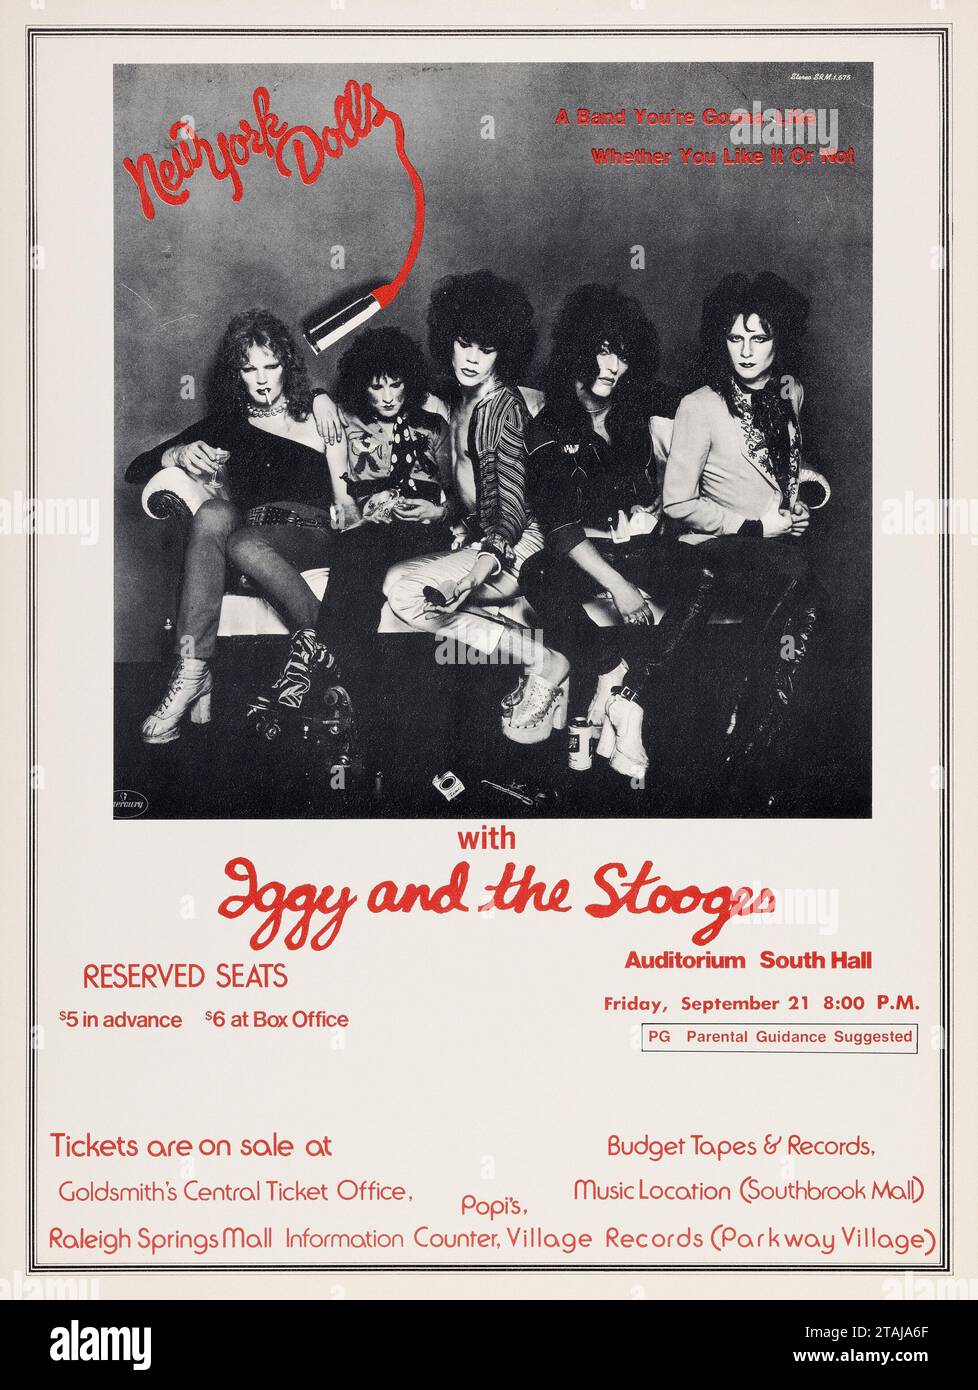 New York Dolls, Iggy & the Stooges 1973 Memphis, Tennessee - poster dei concerti rock d'epoca Foto Stock